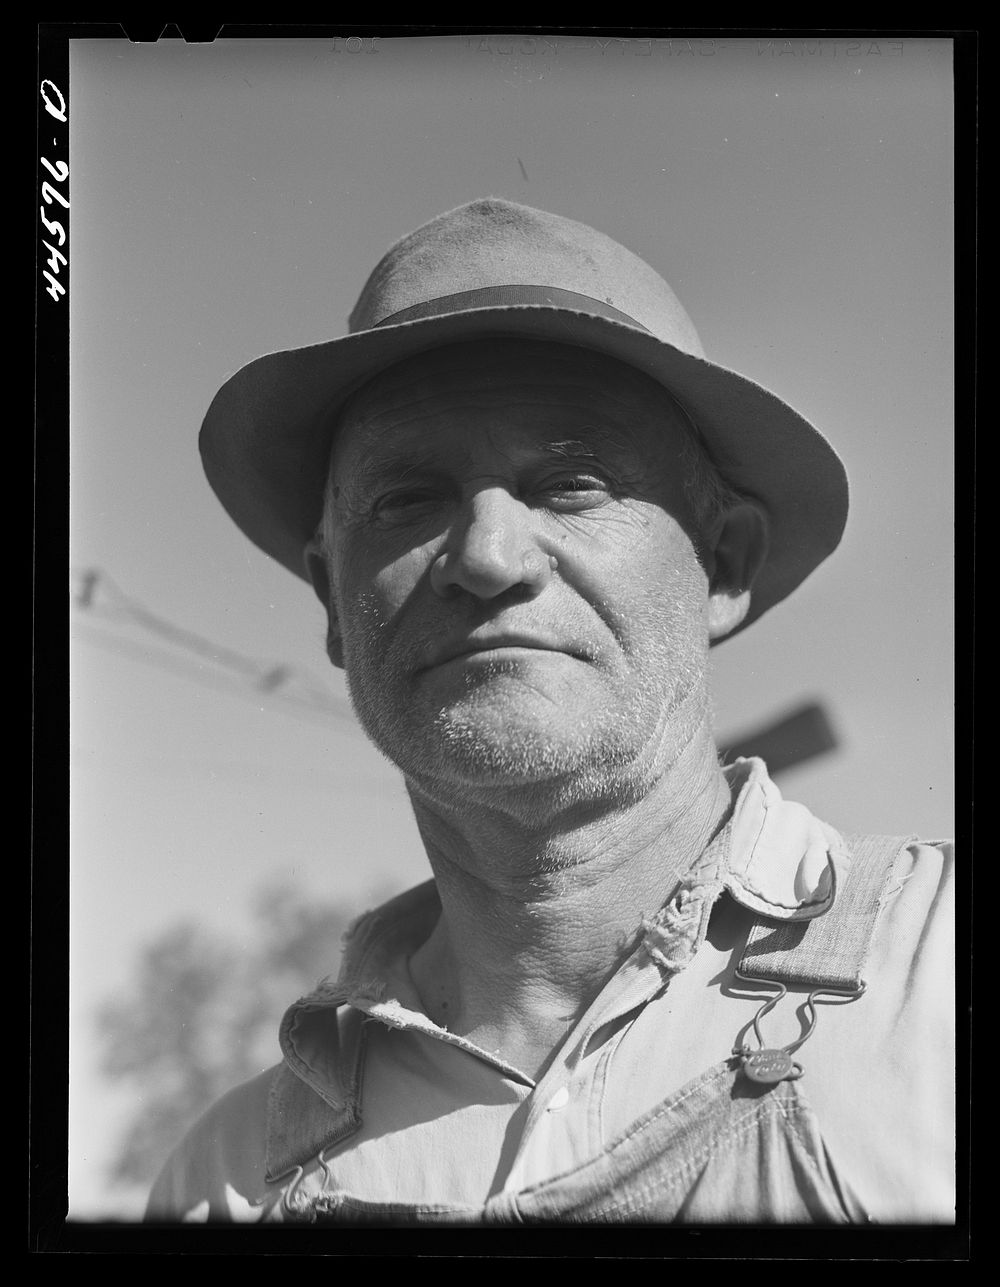 E. A. Marcus, FSA (Farm Security Administration) borrower. Greene County, Georgia. Sourced from the Library of Congress.